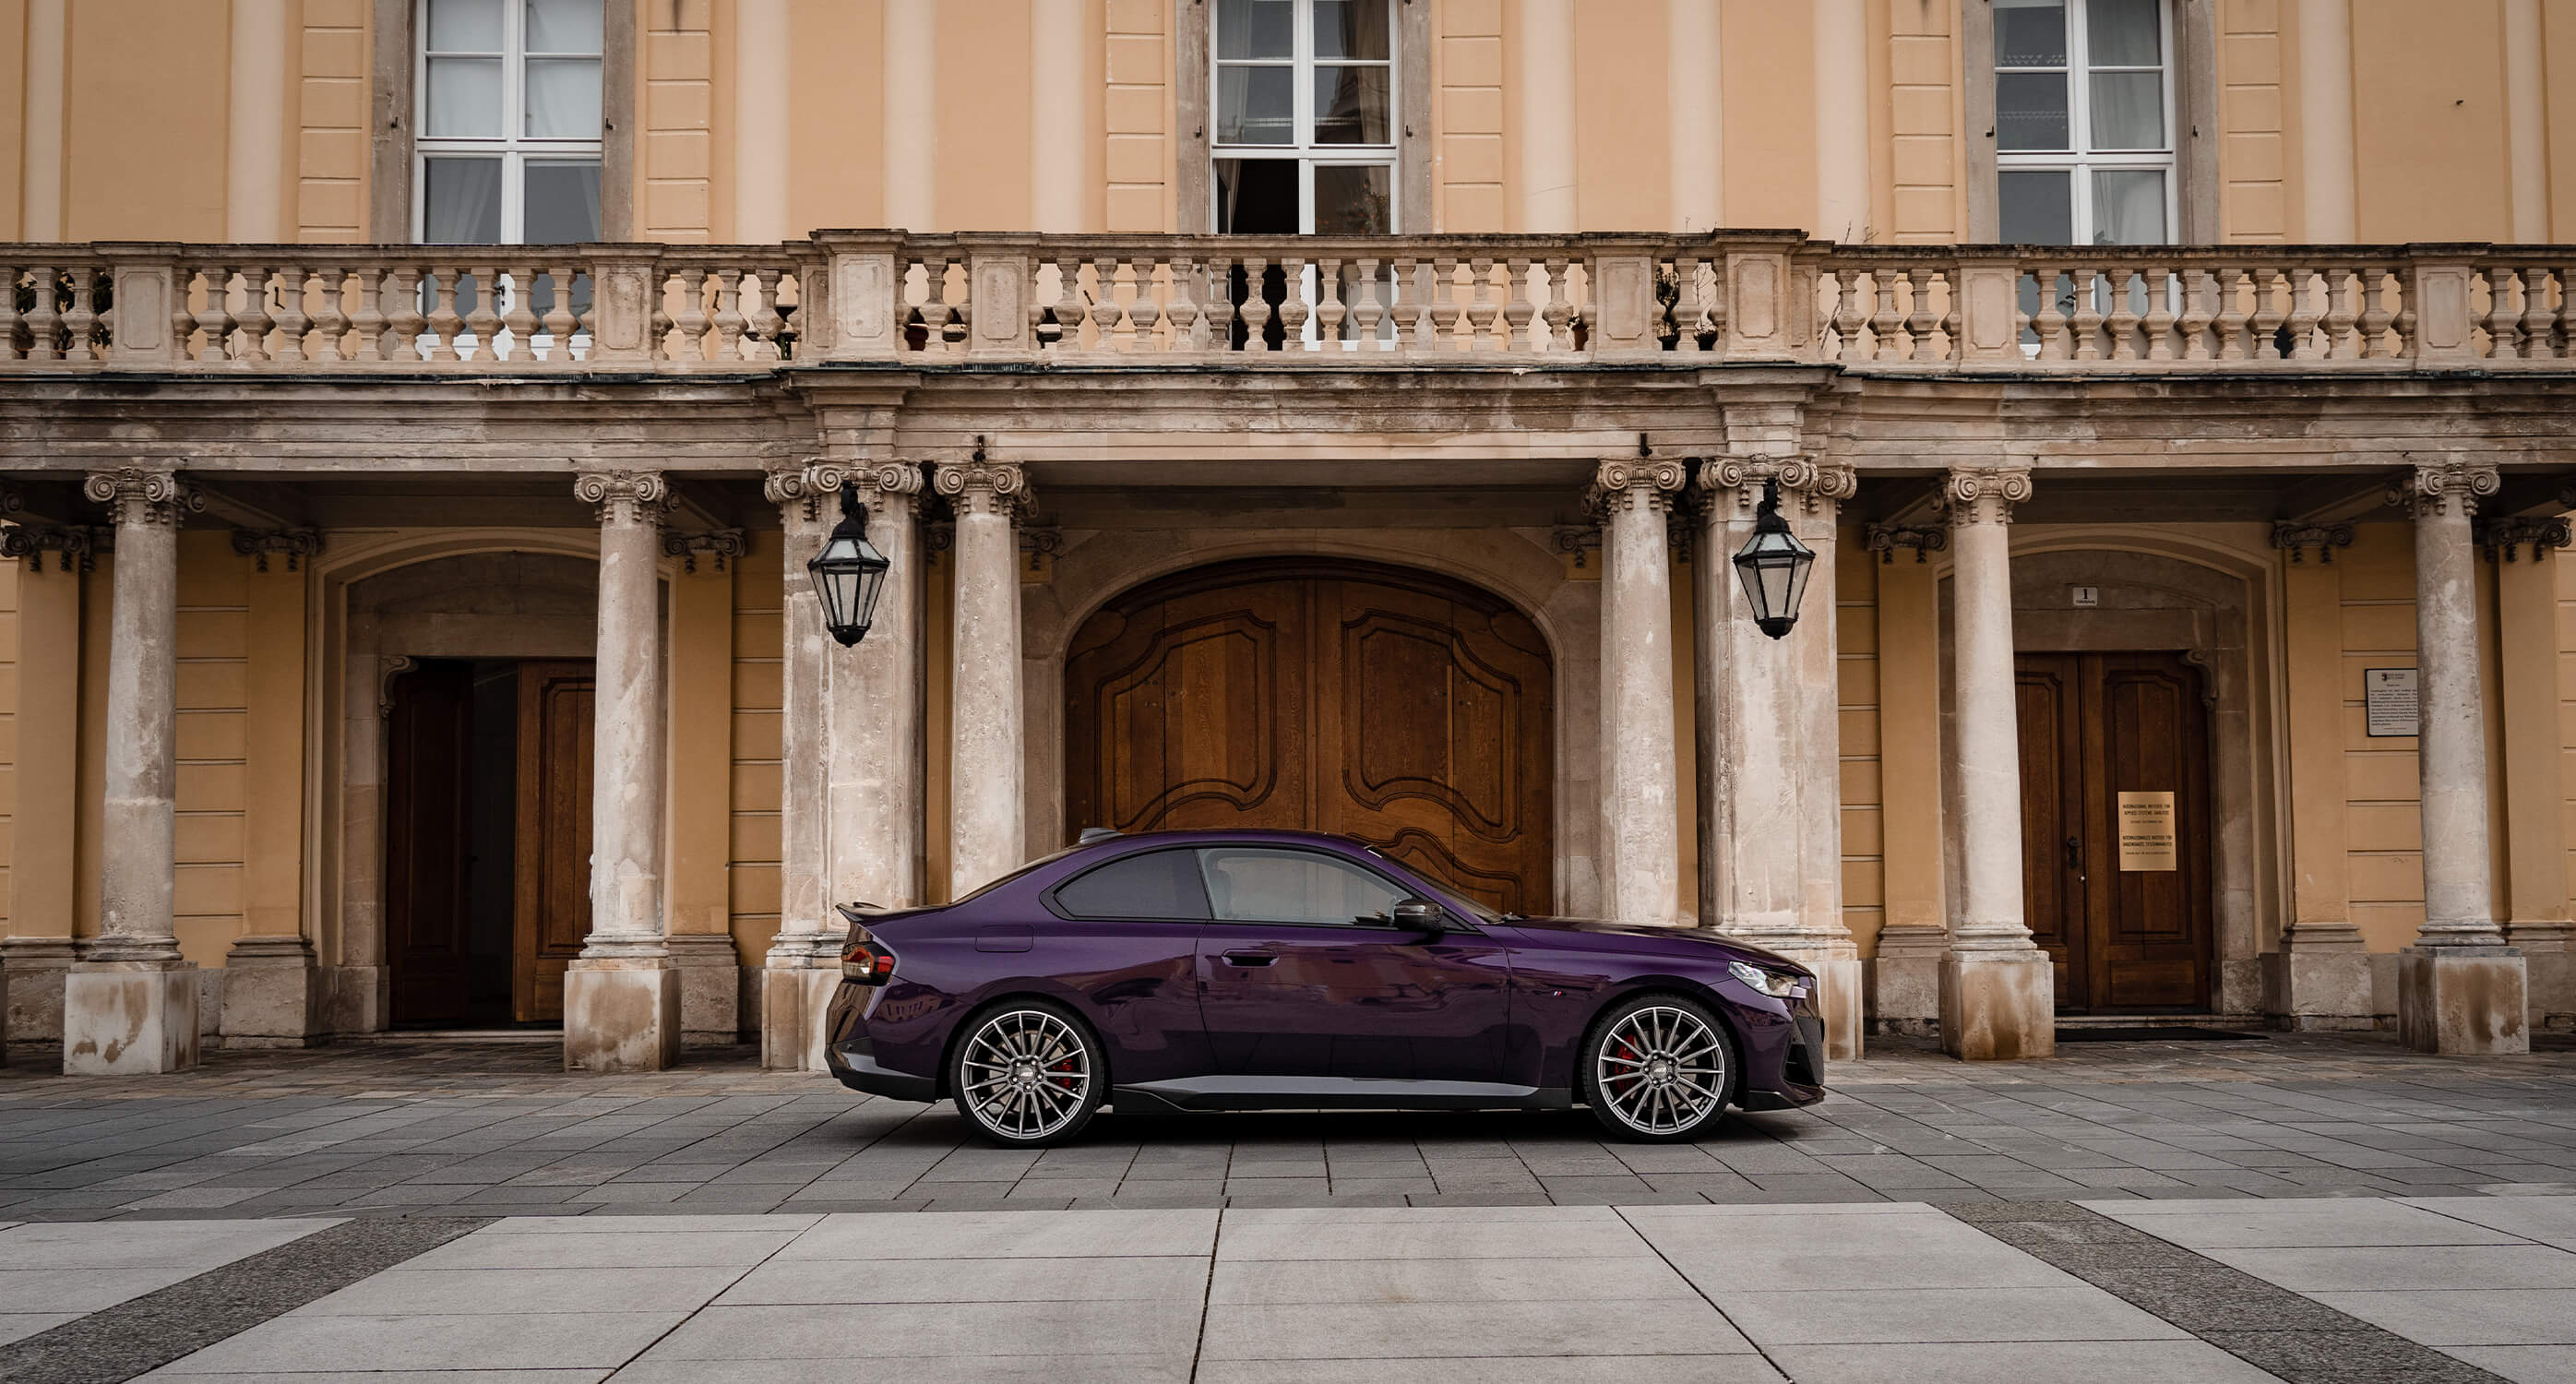 Mysterious elegance for the snappy coupé